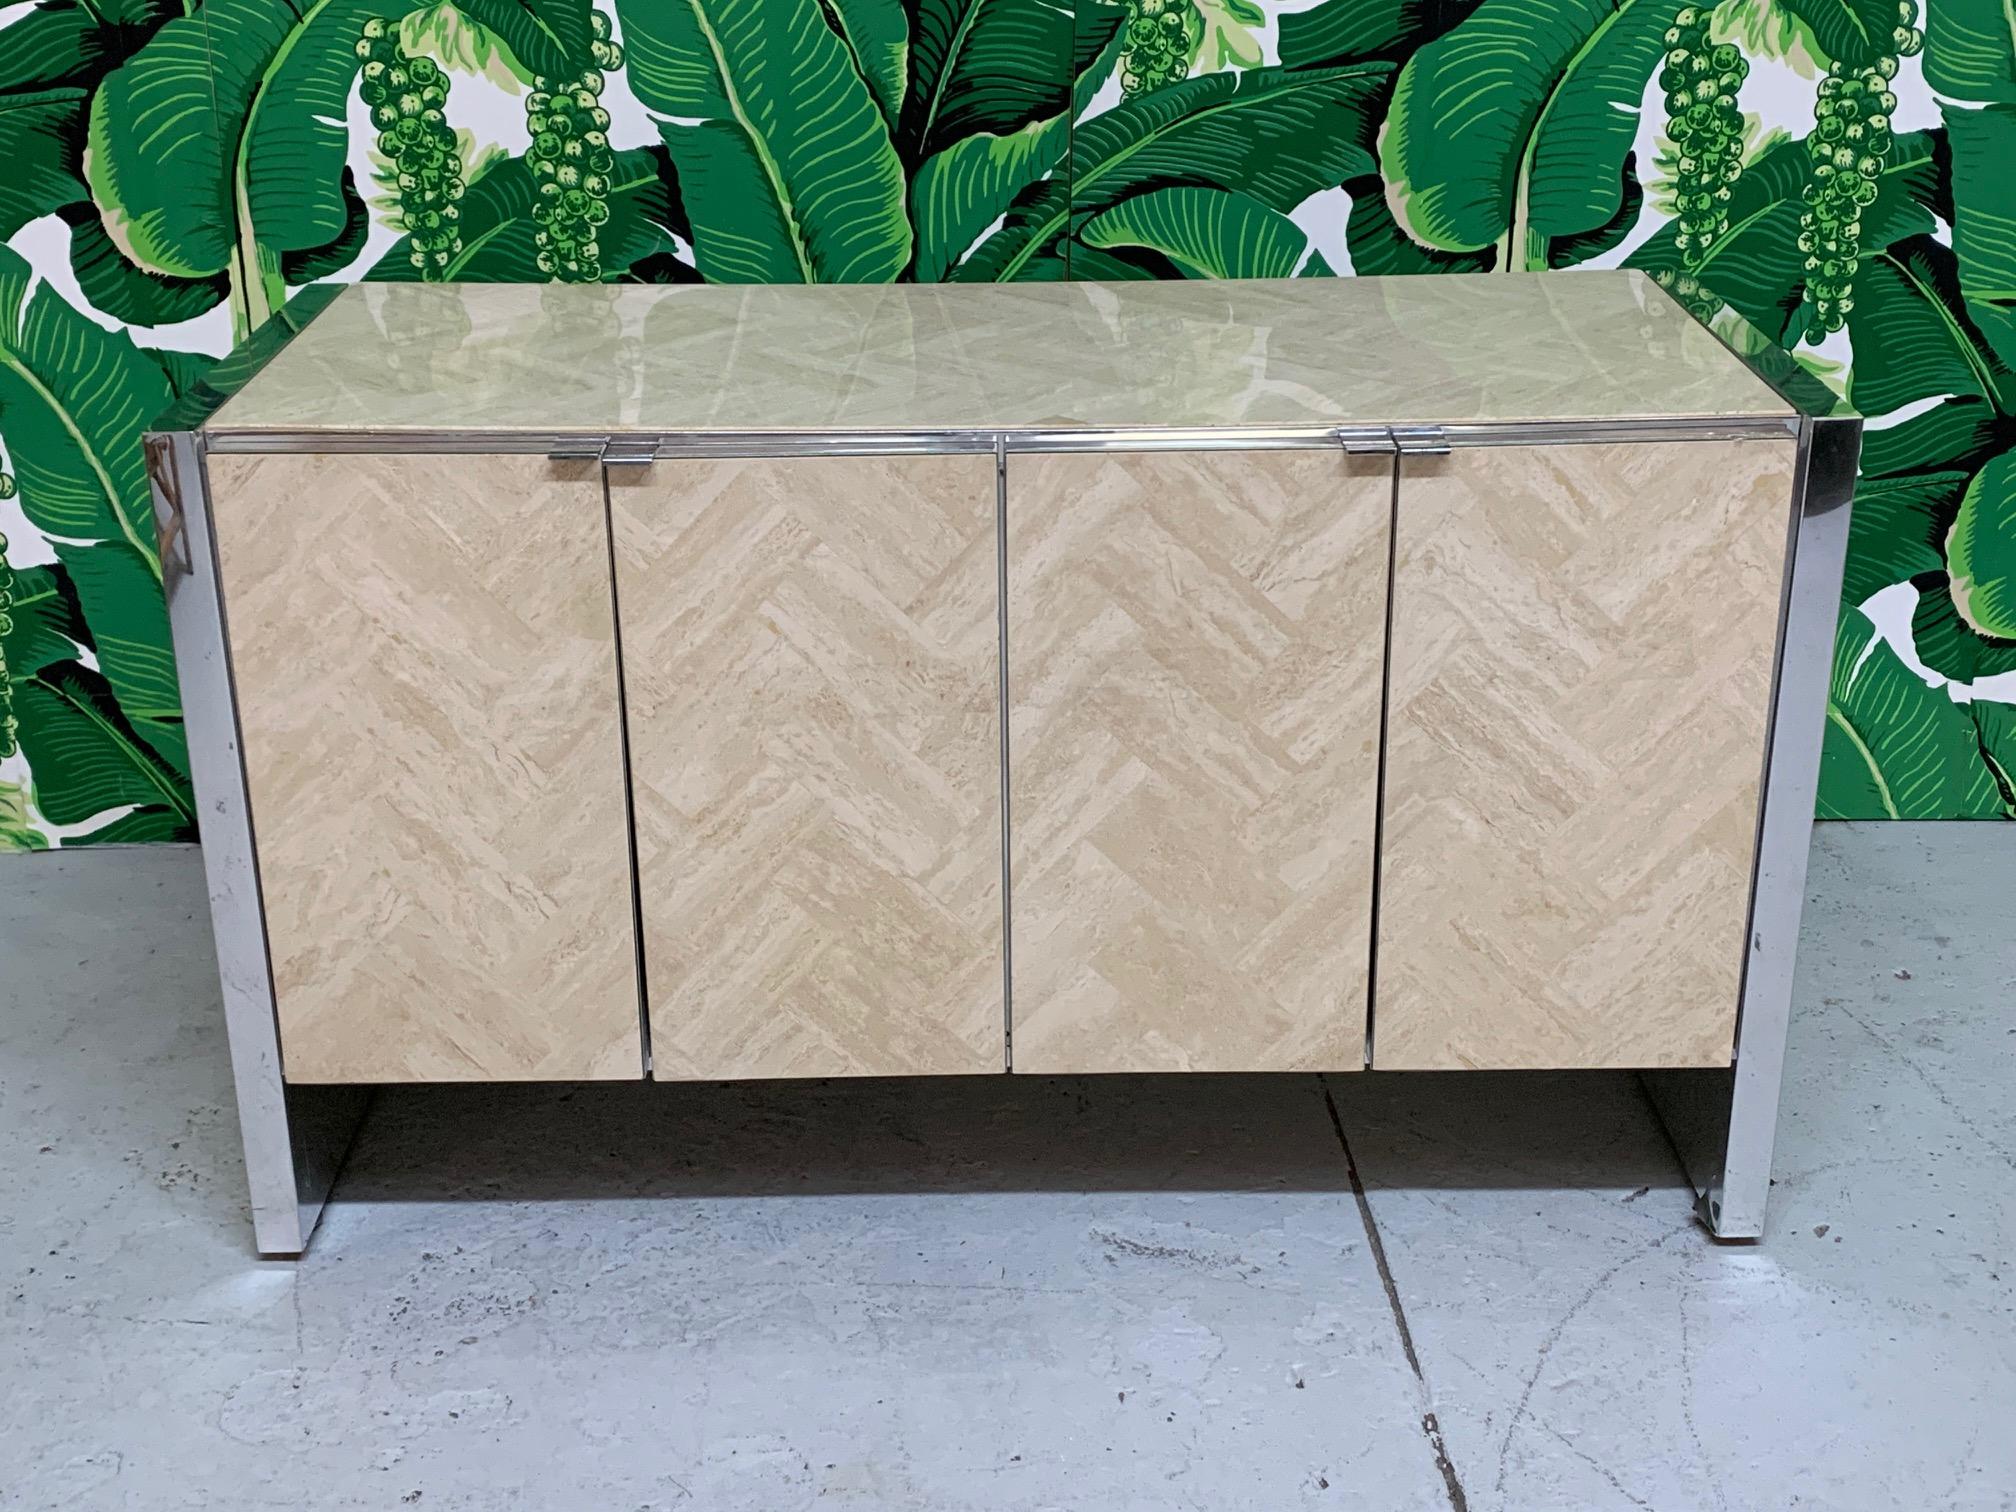 Midcentury credenza features stone inlay in a herringbone pattern and chrome accents. In the style of Ello or Milo Baughman. Good condition with minor imperfections consistent with age.